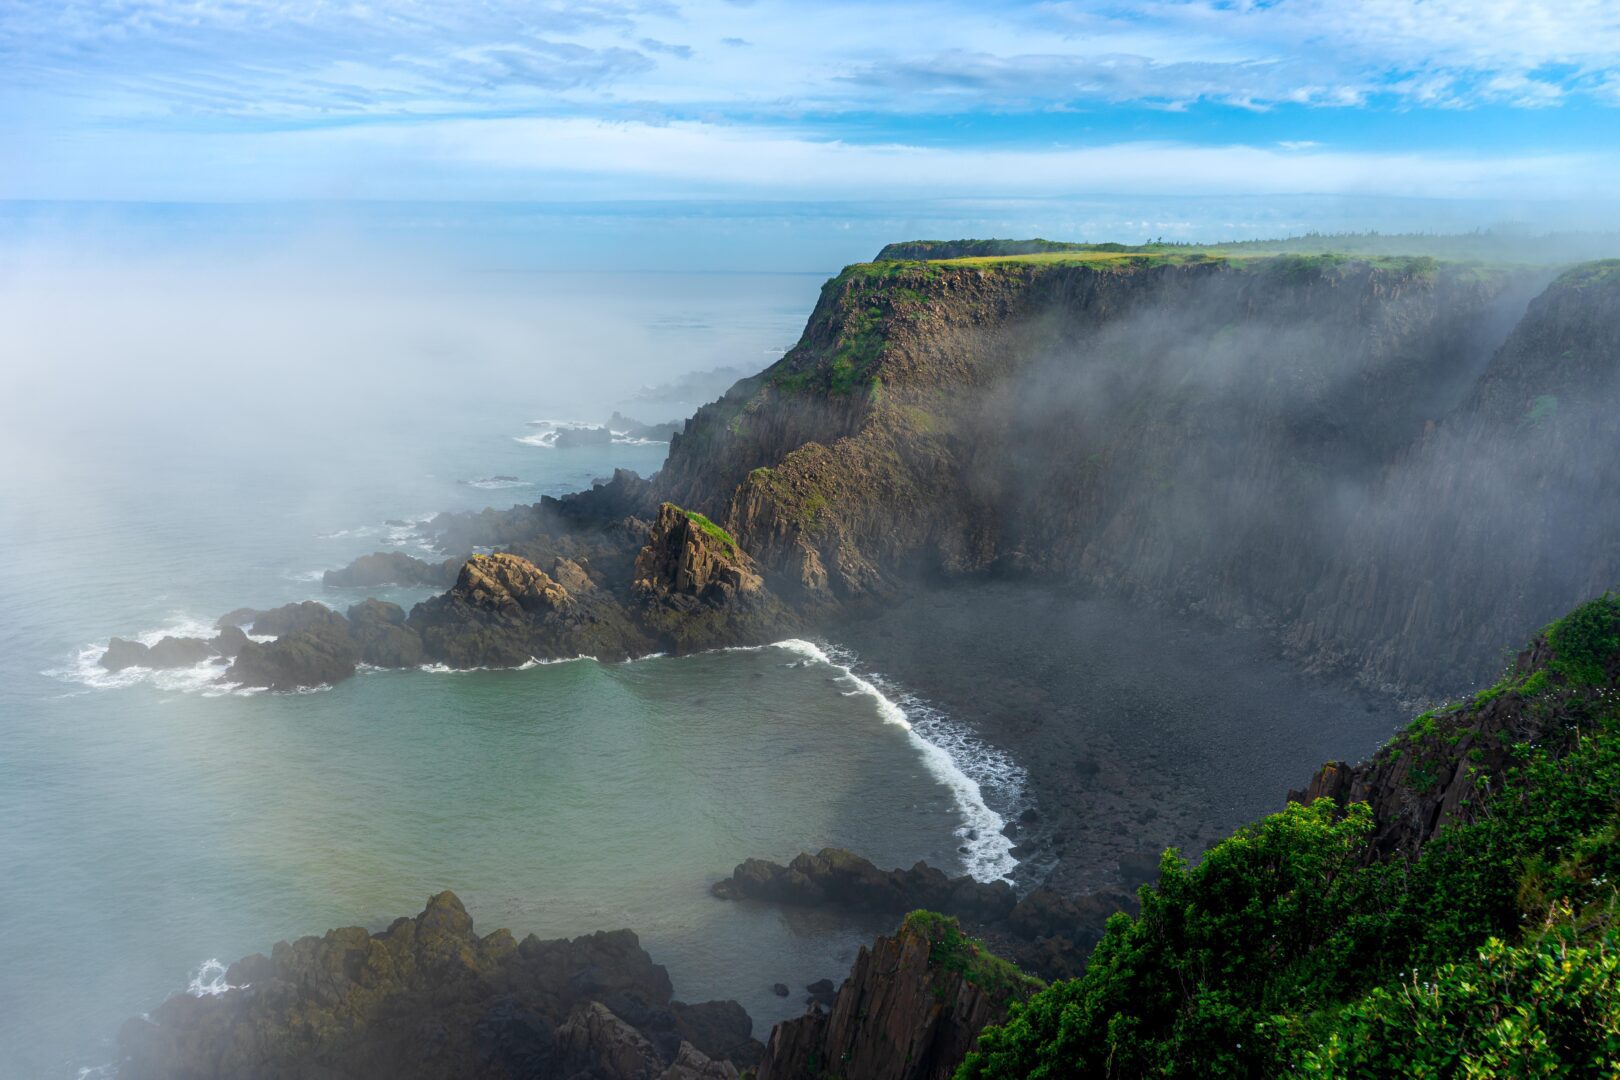 A cliff overlooking the ocean and fog.